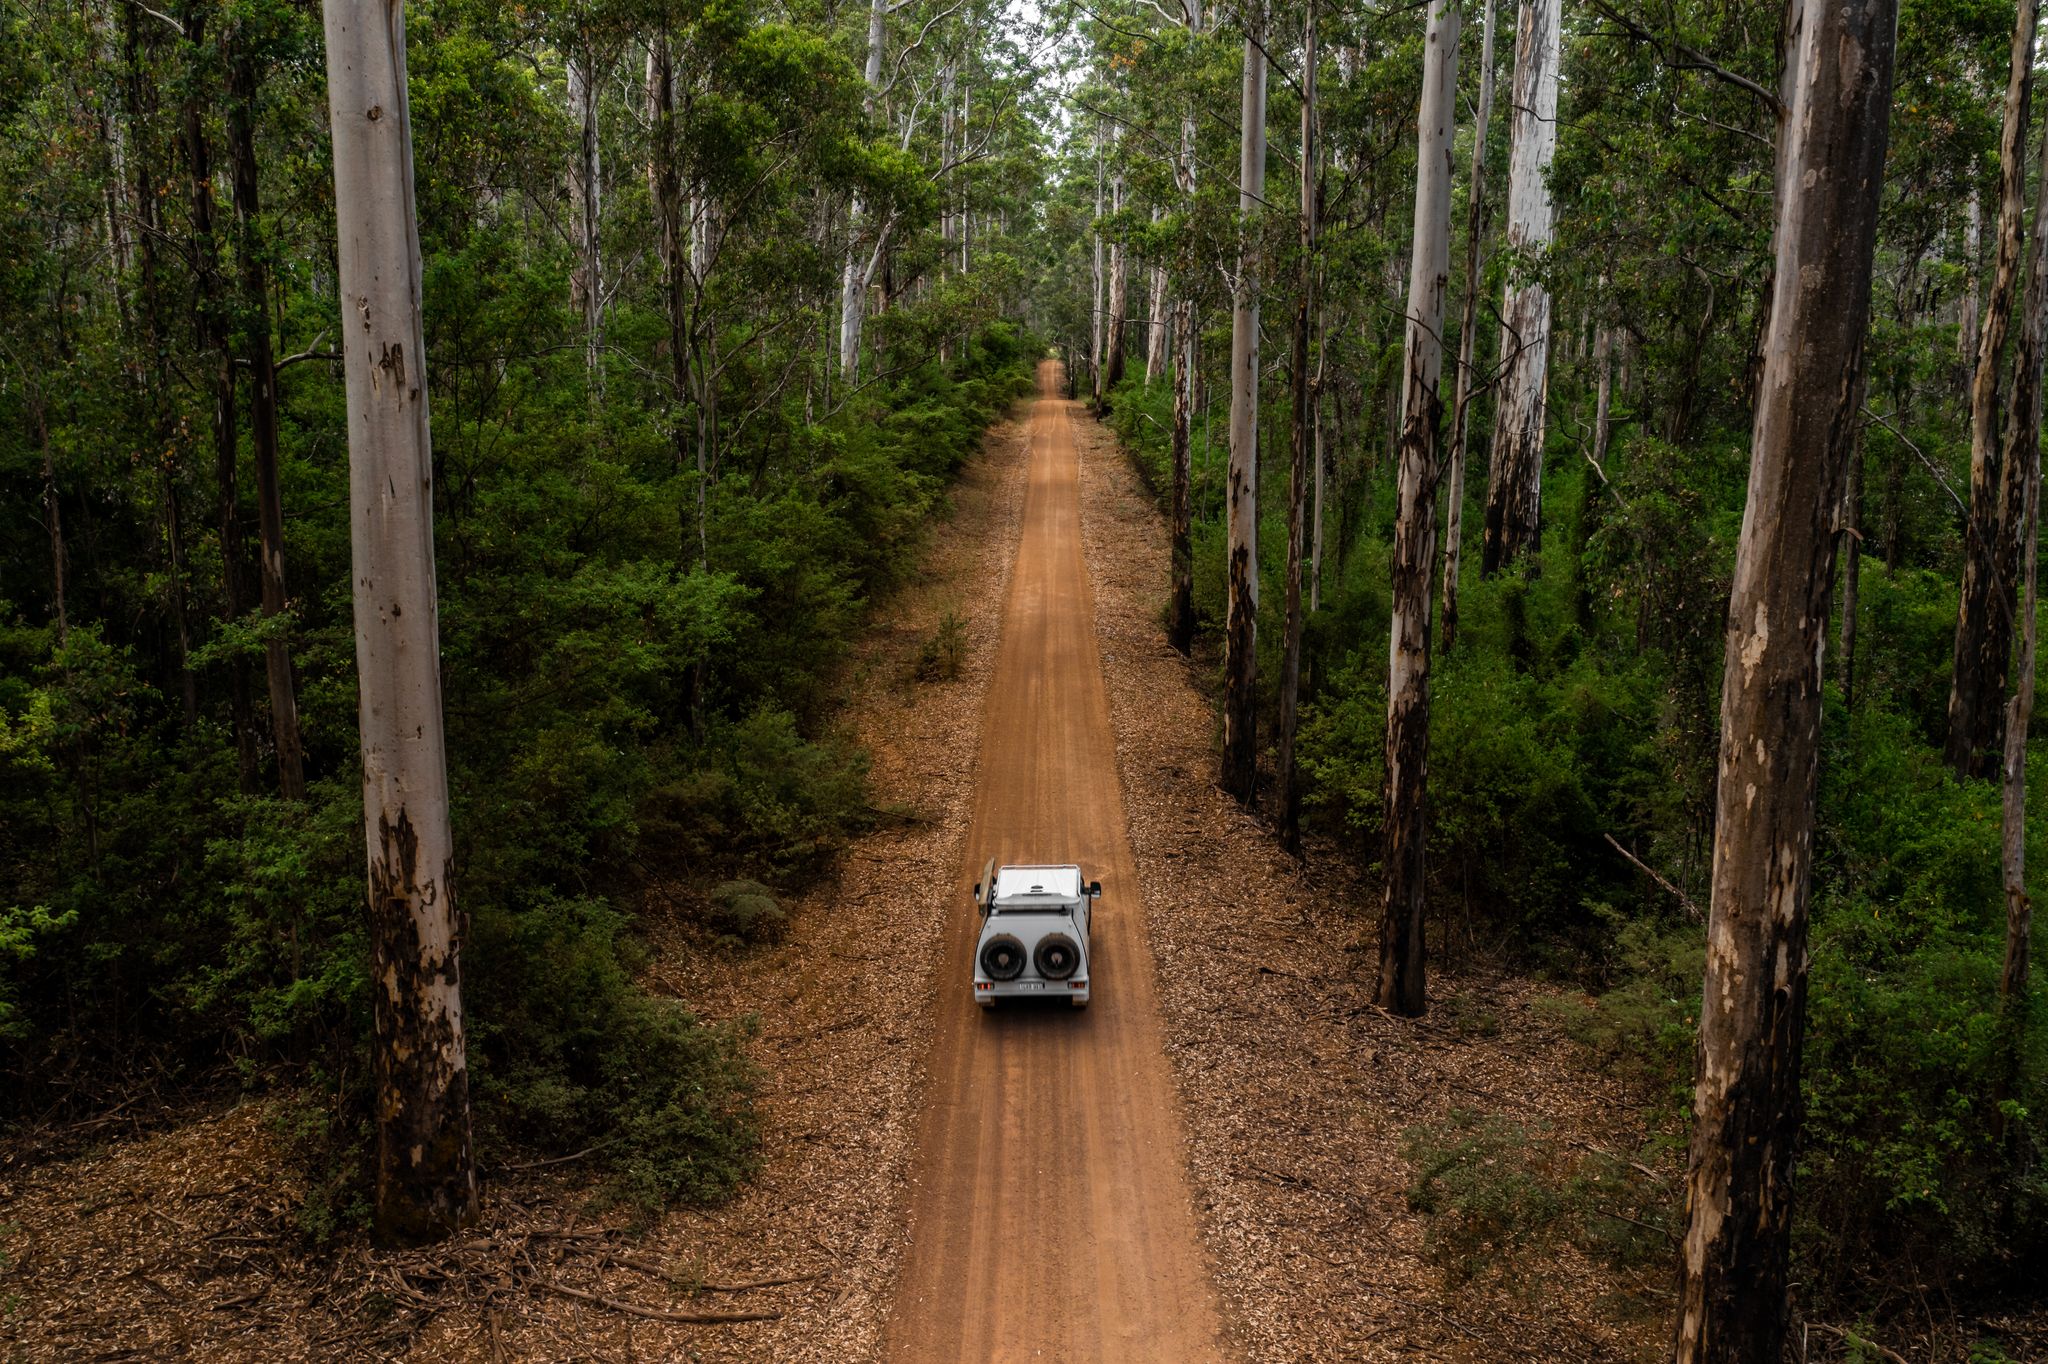 A car driving through the forest